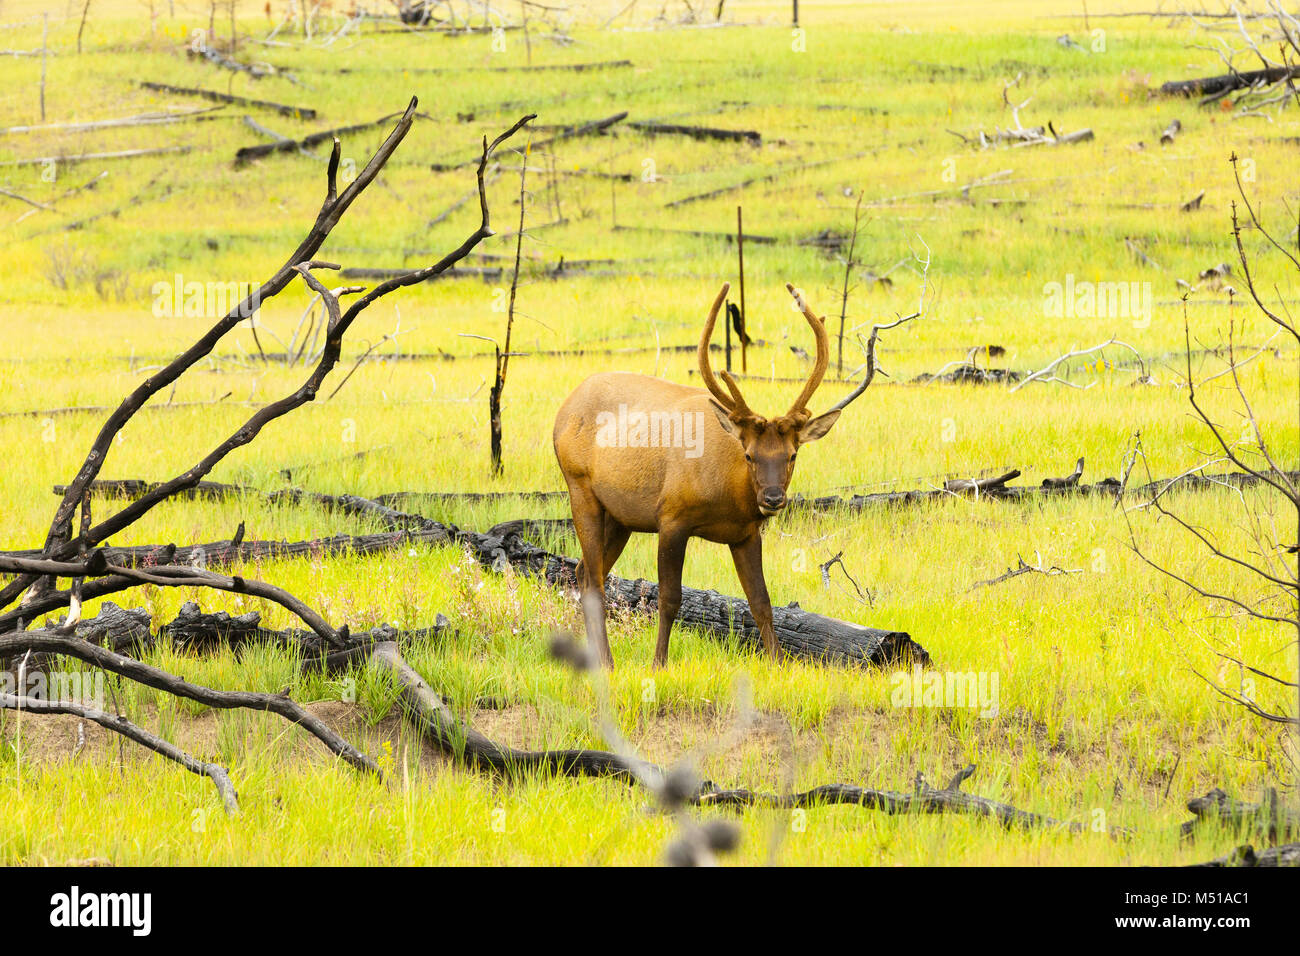 lack-tailed deer Banff national park Canada Stock Photo